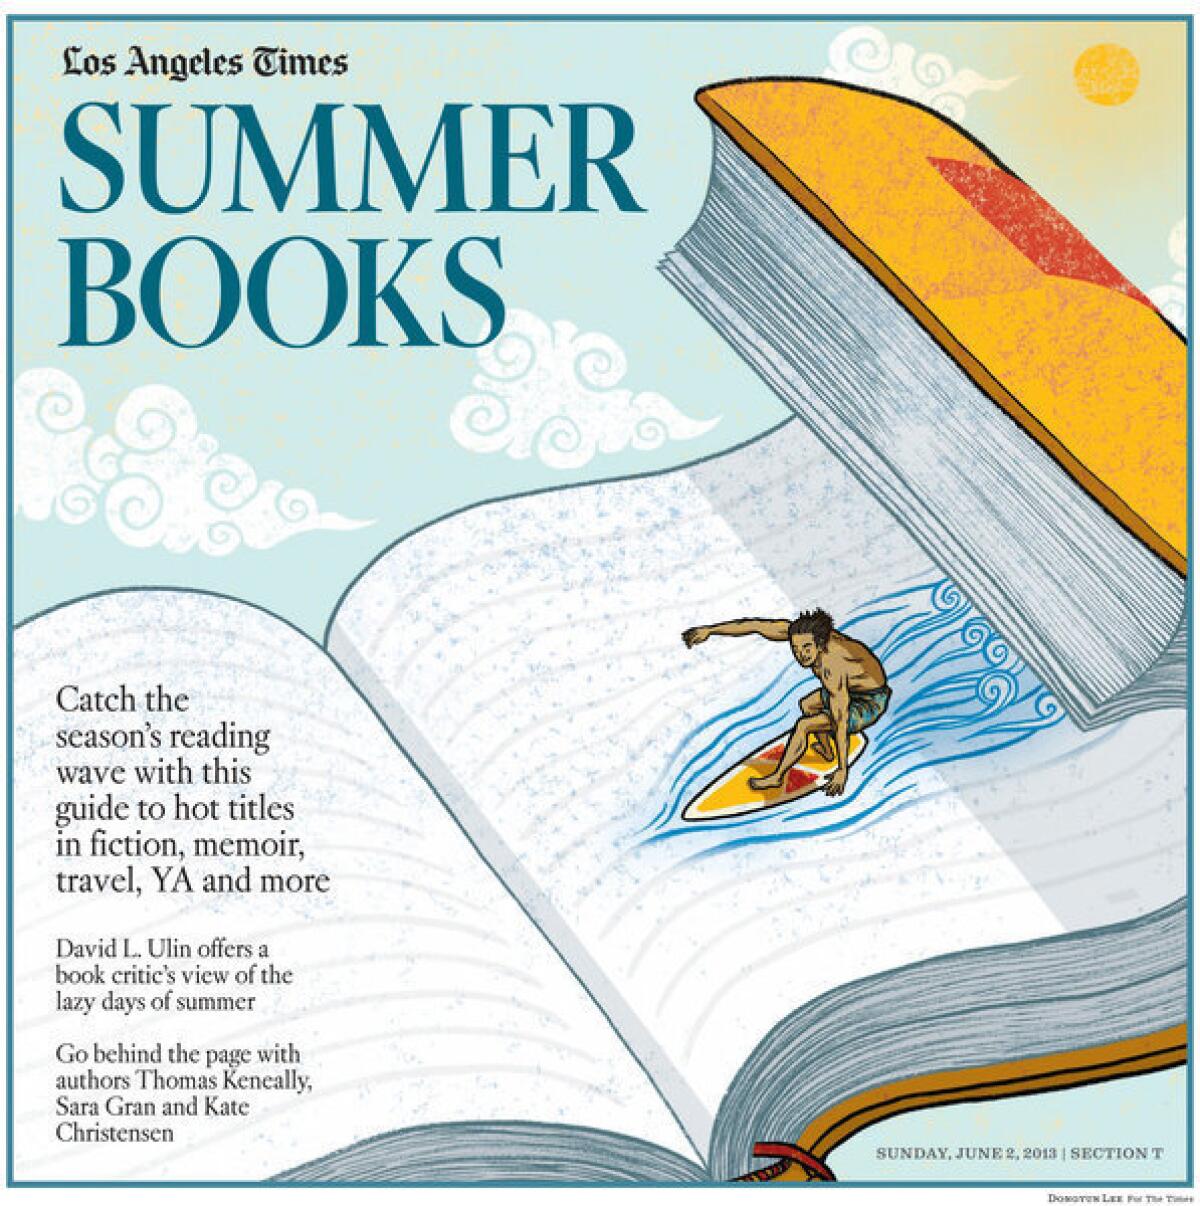 Summer books in the Sunday Los Angeles Times.